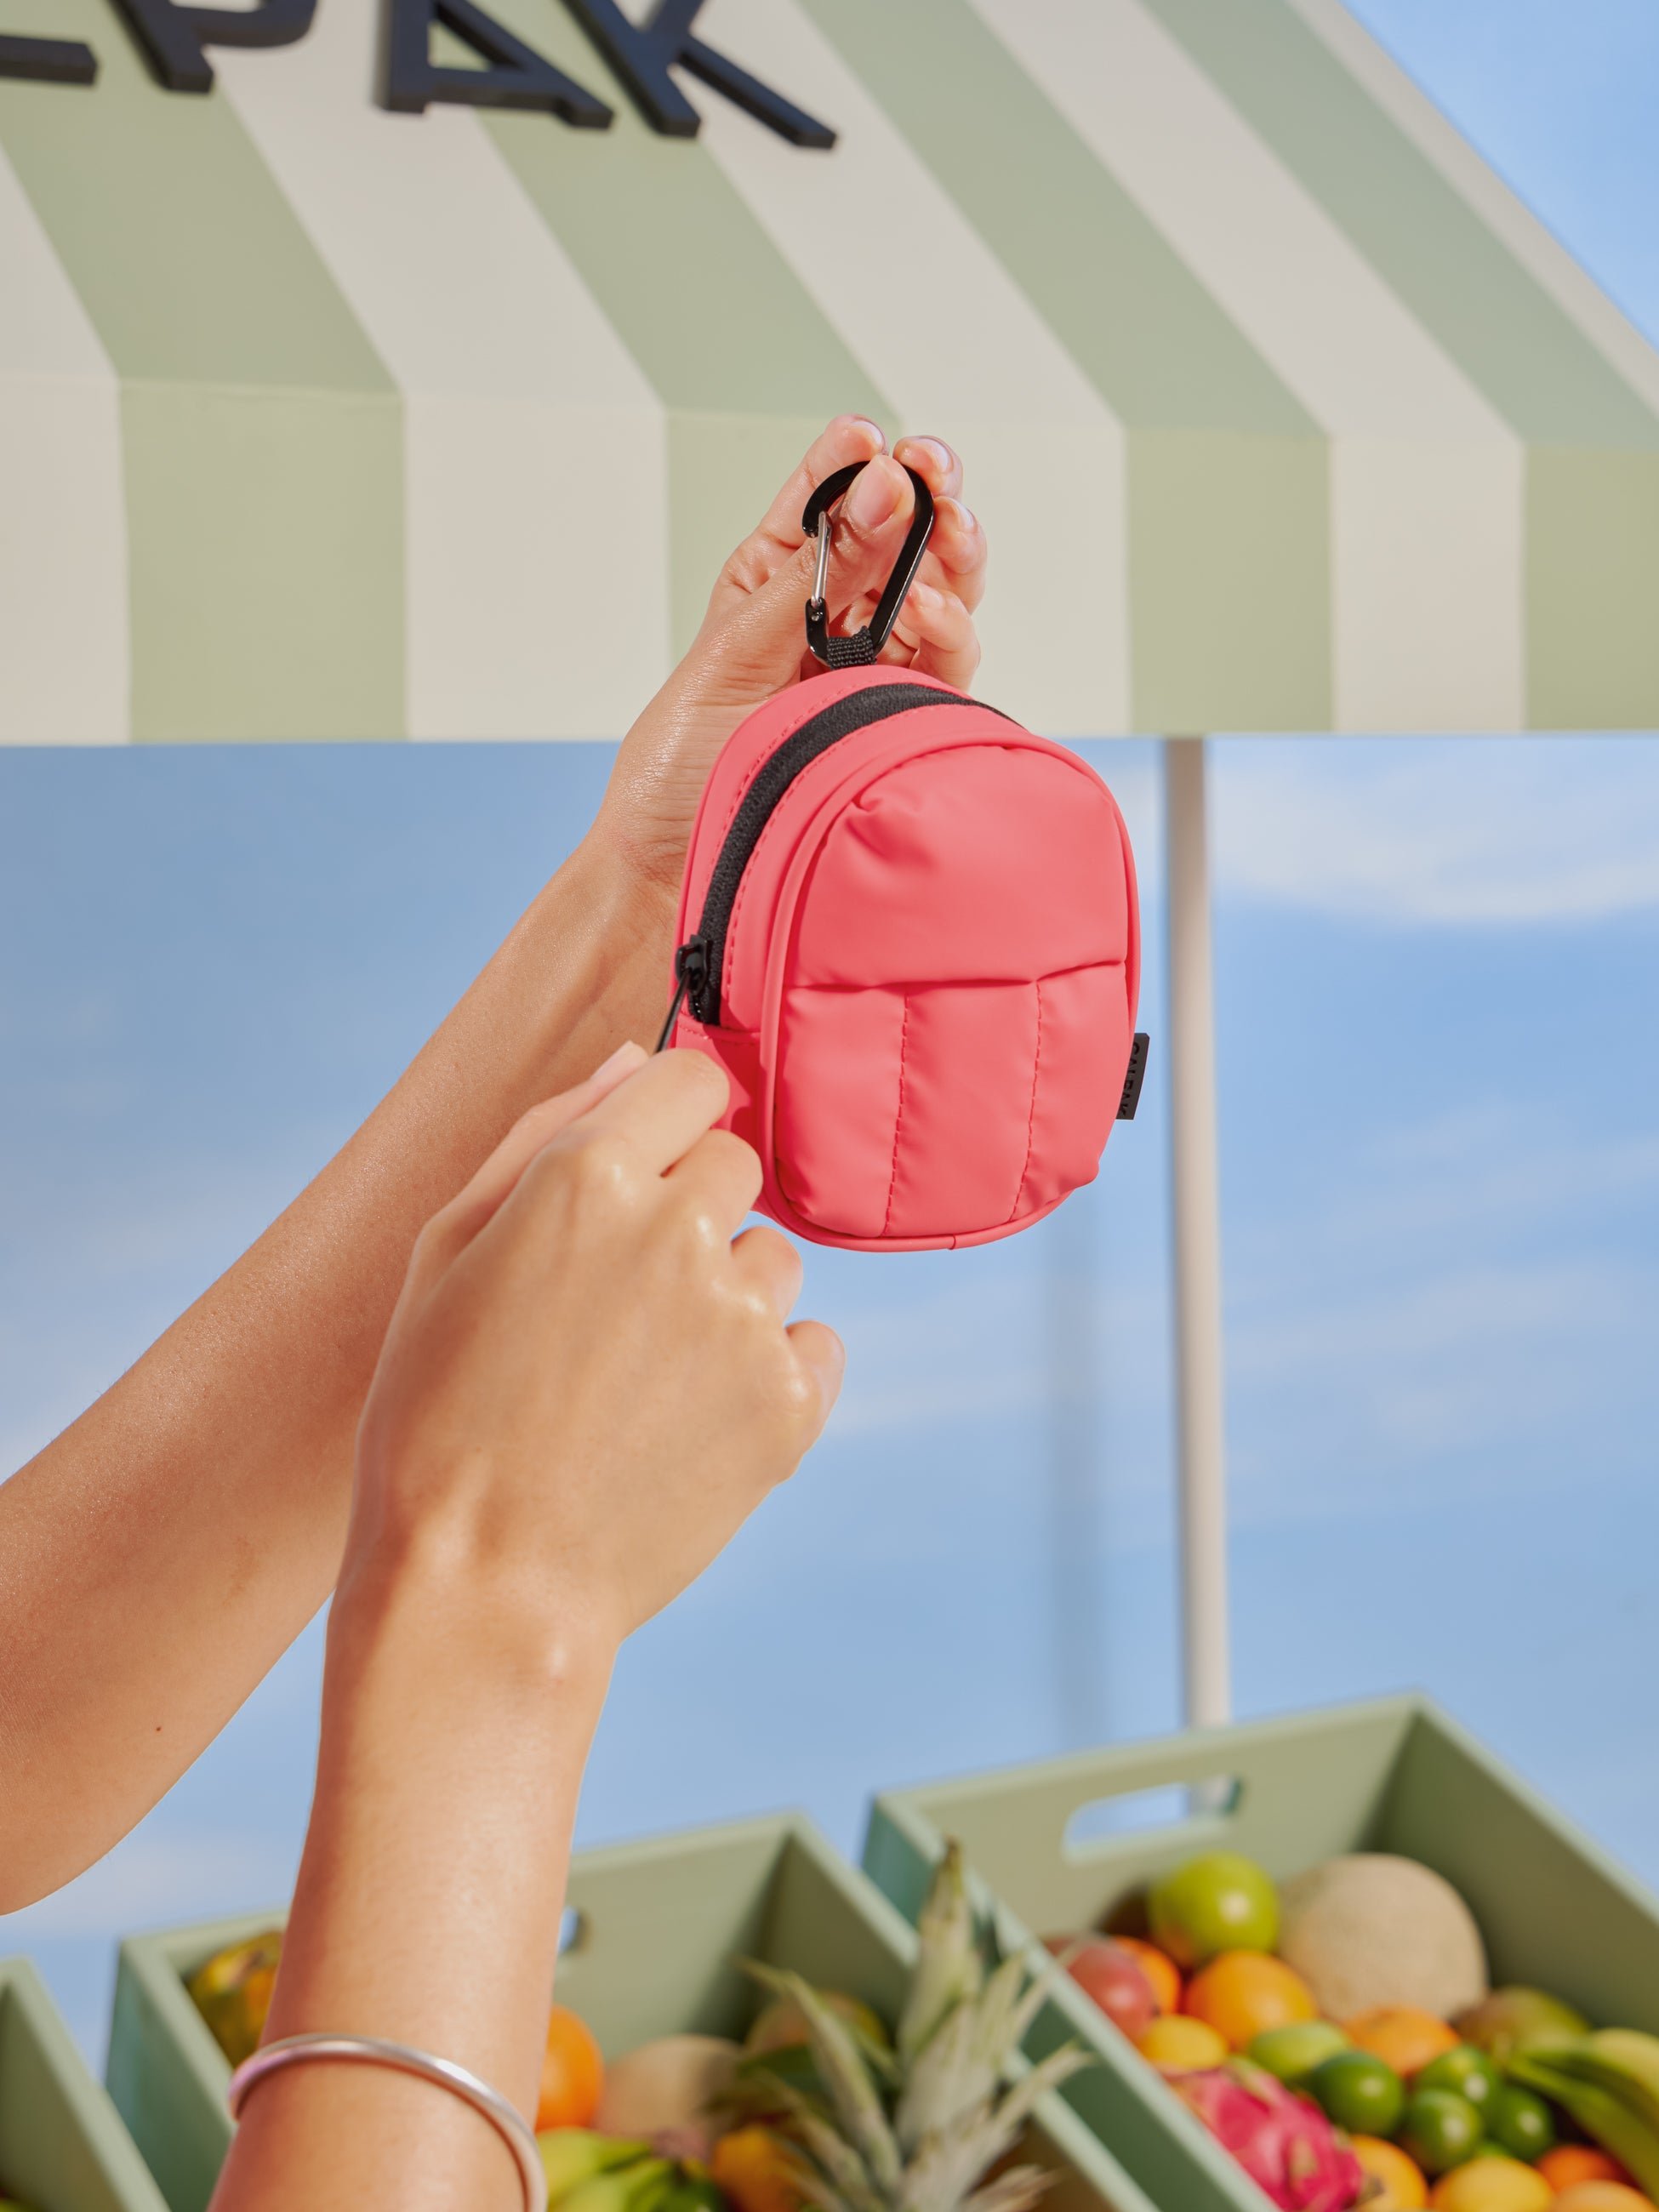 CALPAK Luka backpack key chain with back versatile elastic wrist strap and carabiner clip in watermelon pink